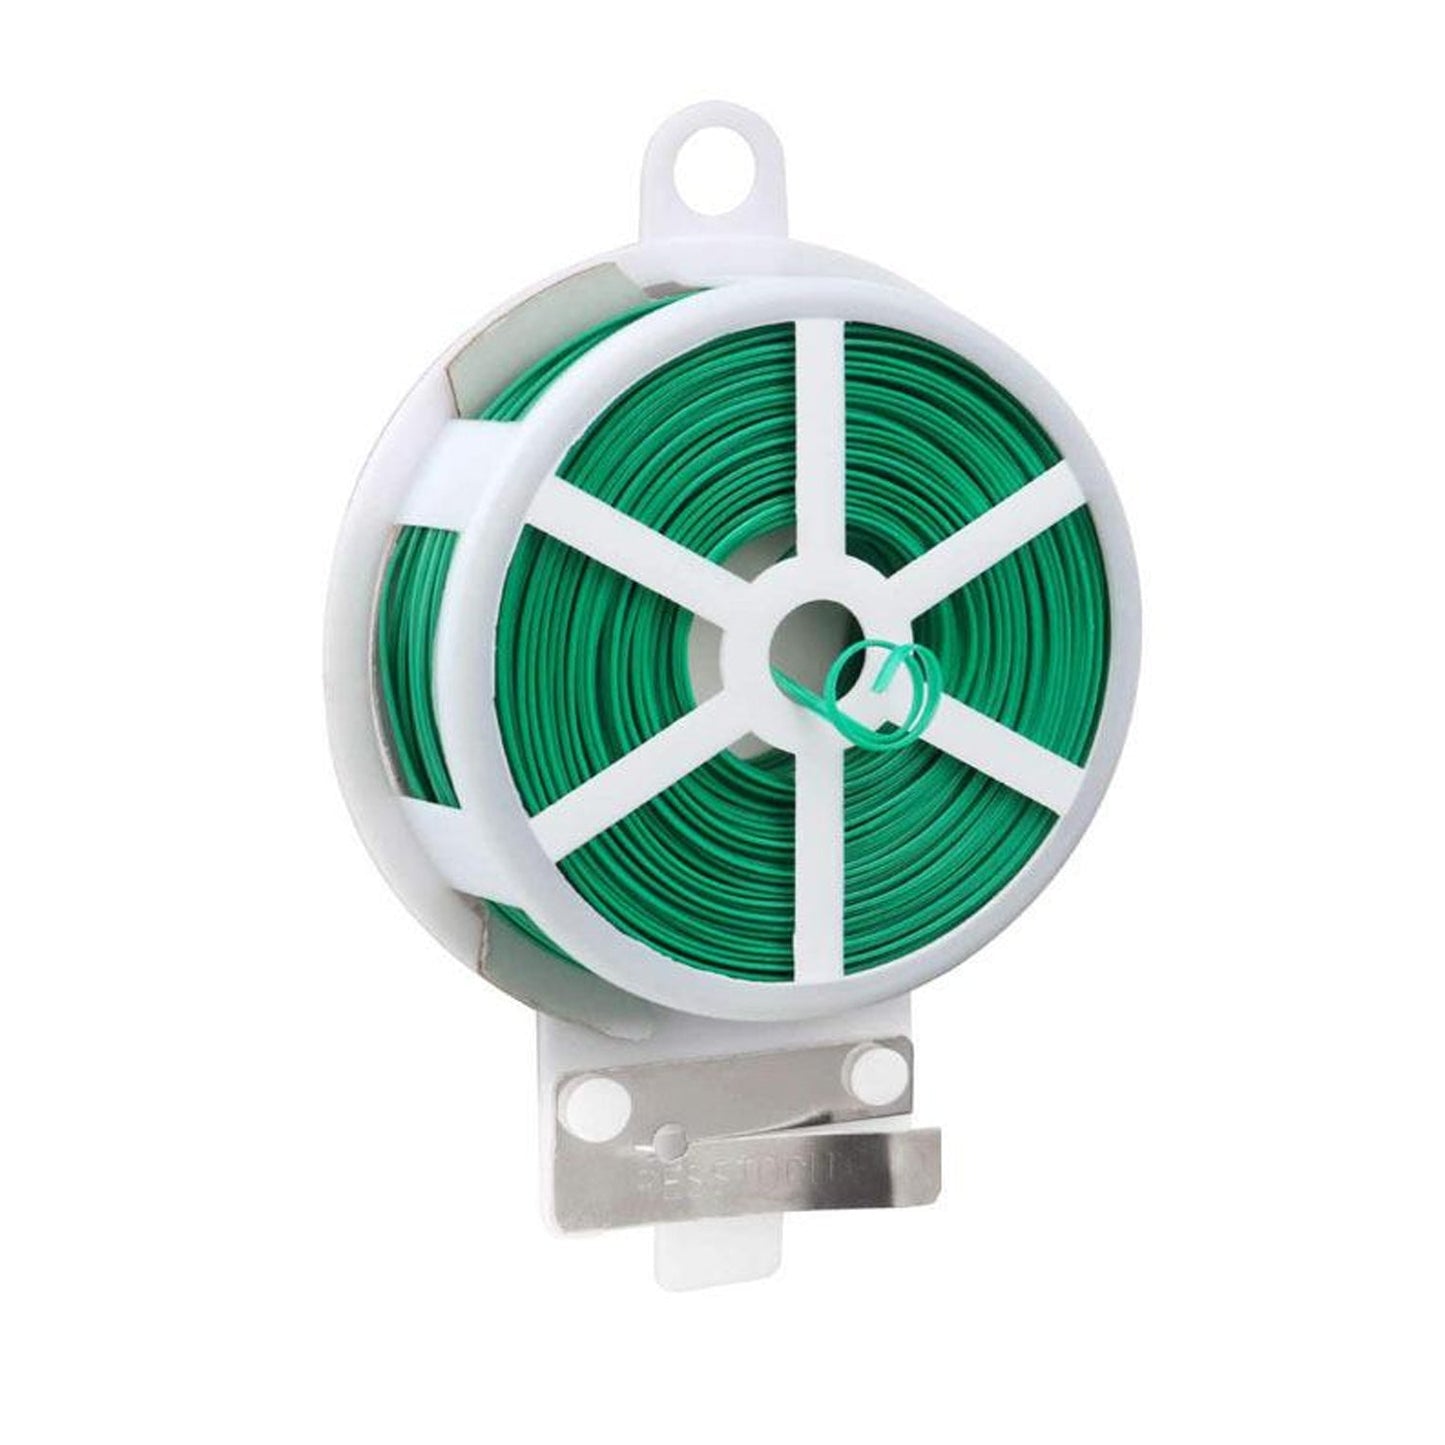 0873 Plastic Twist Tie Wire Spool With Cutter For Garden Yard Plant 50m (Green) - SWASTIK CREATIONS The Trend Point SWASTIK CREATIONS The Trend Point